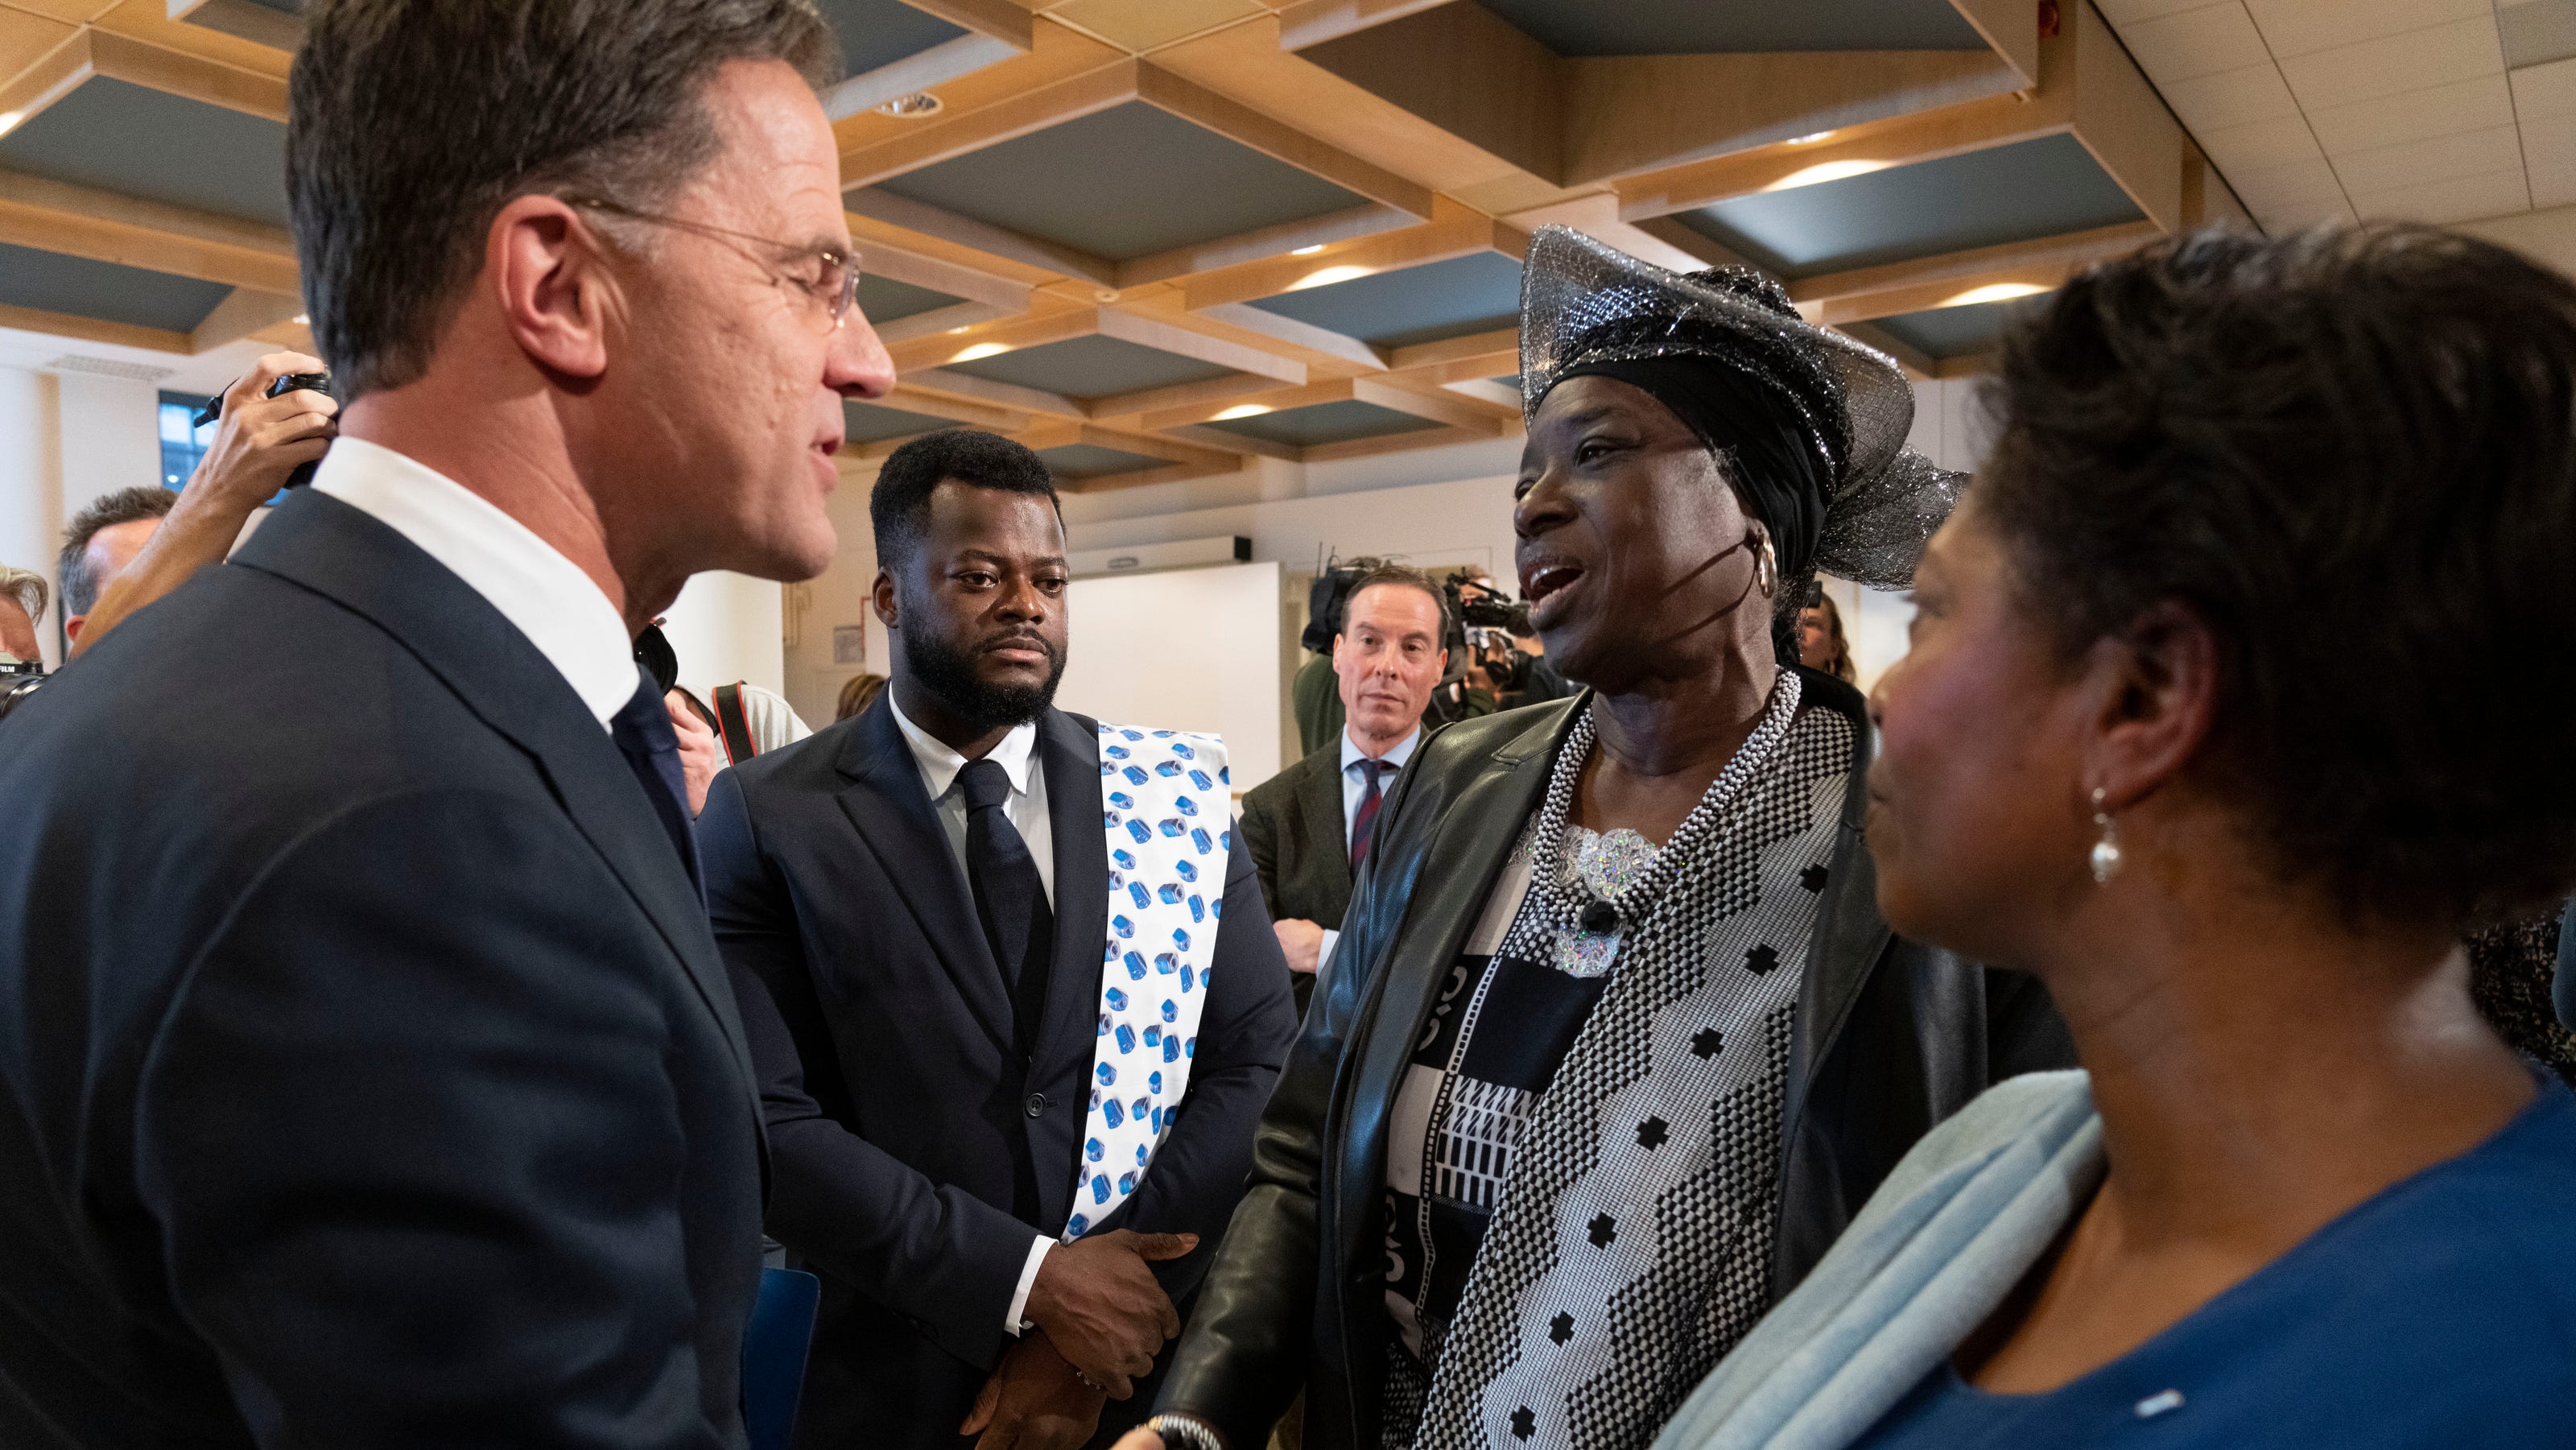 Dutch leader apologizes for Netherlands' role in slavery and slave trade